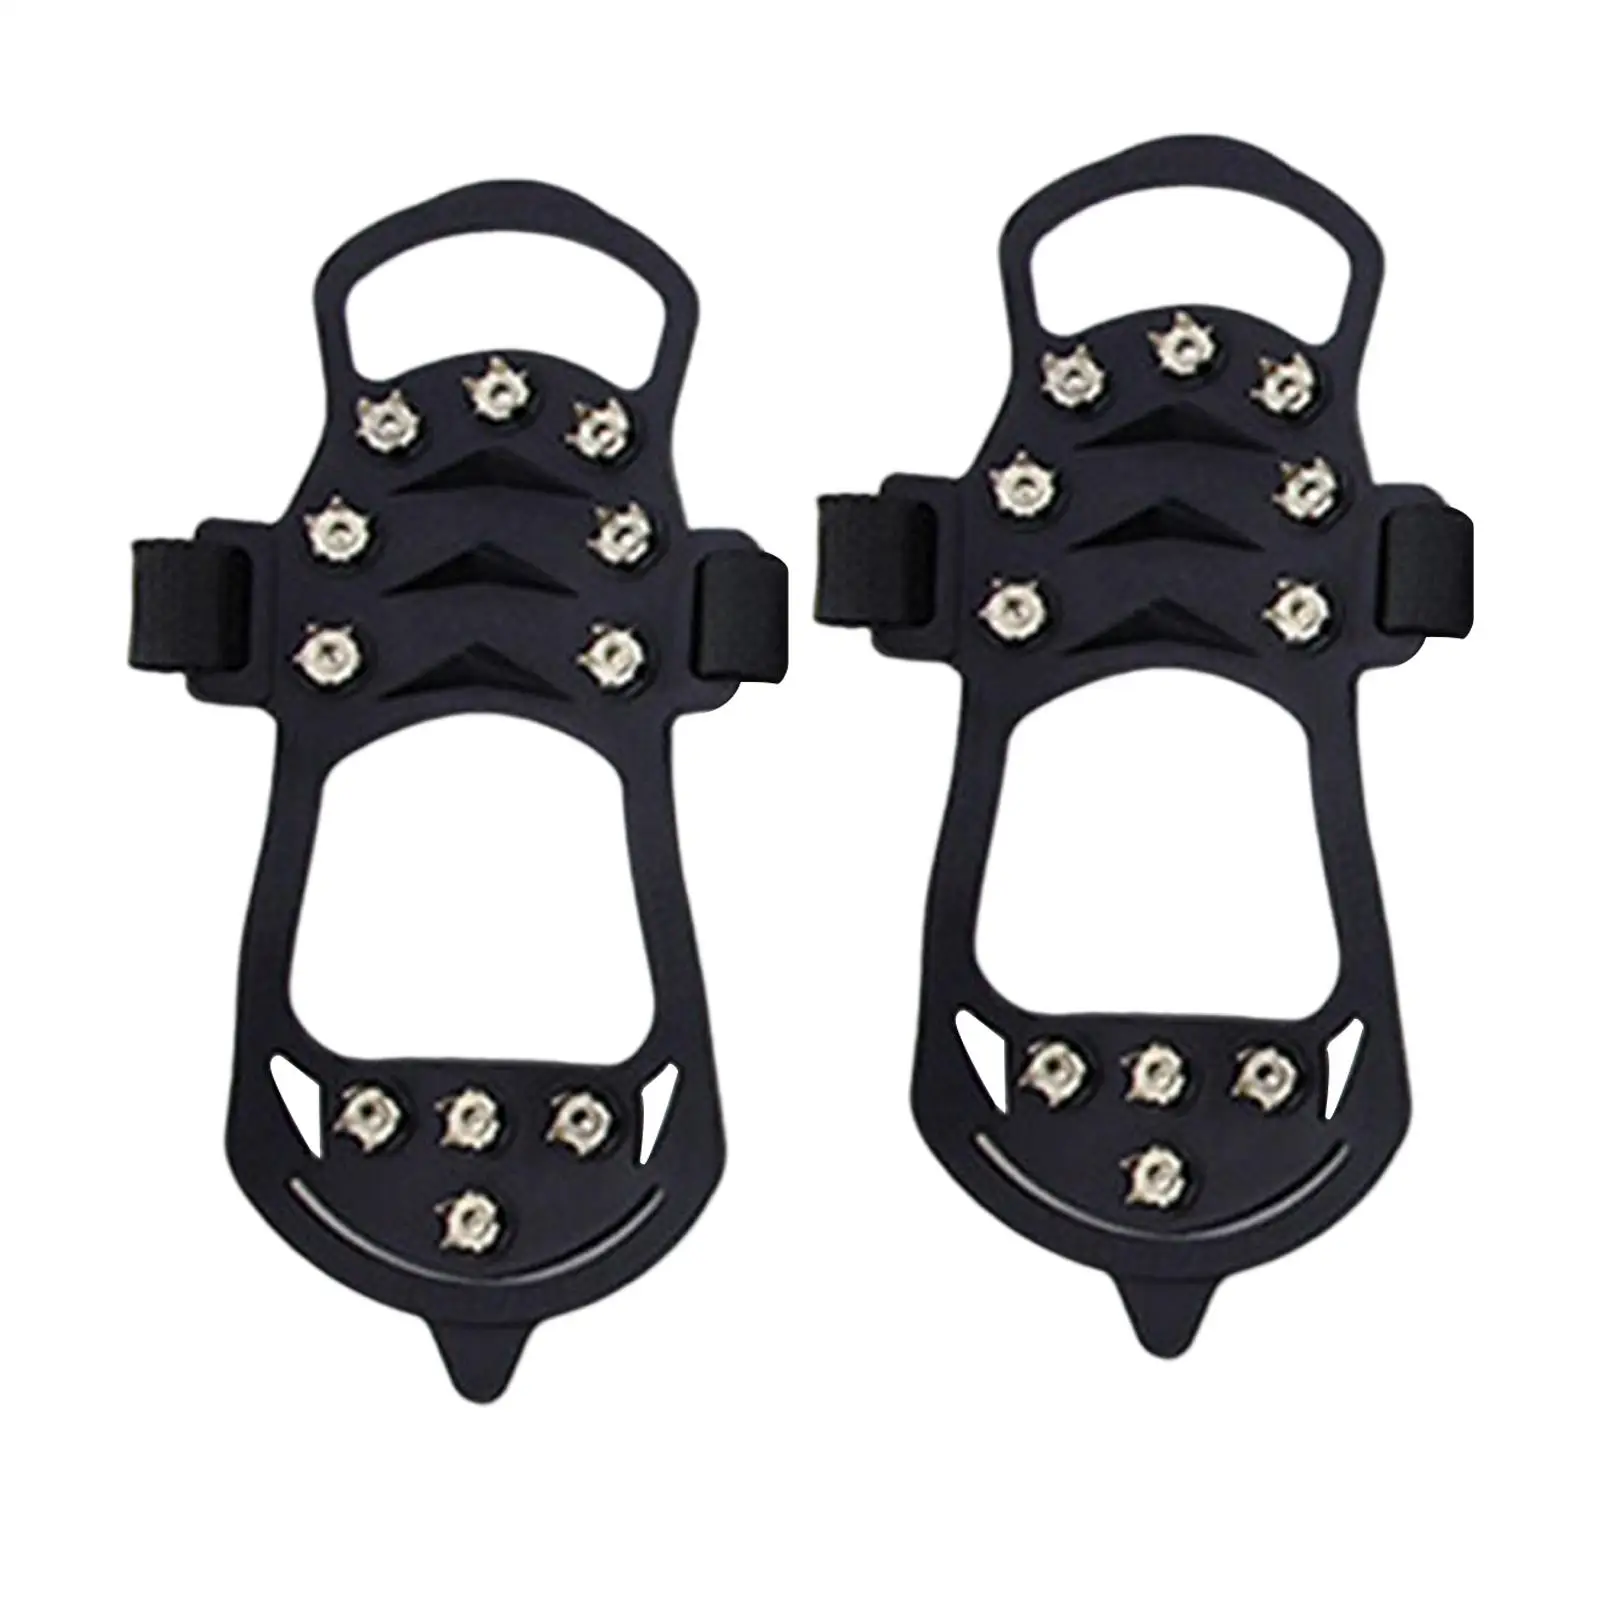 Non Slip 11 Spikes Crampons, Shoe Cover Lightweight Ice Snow Grips for Snow